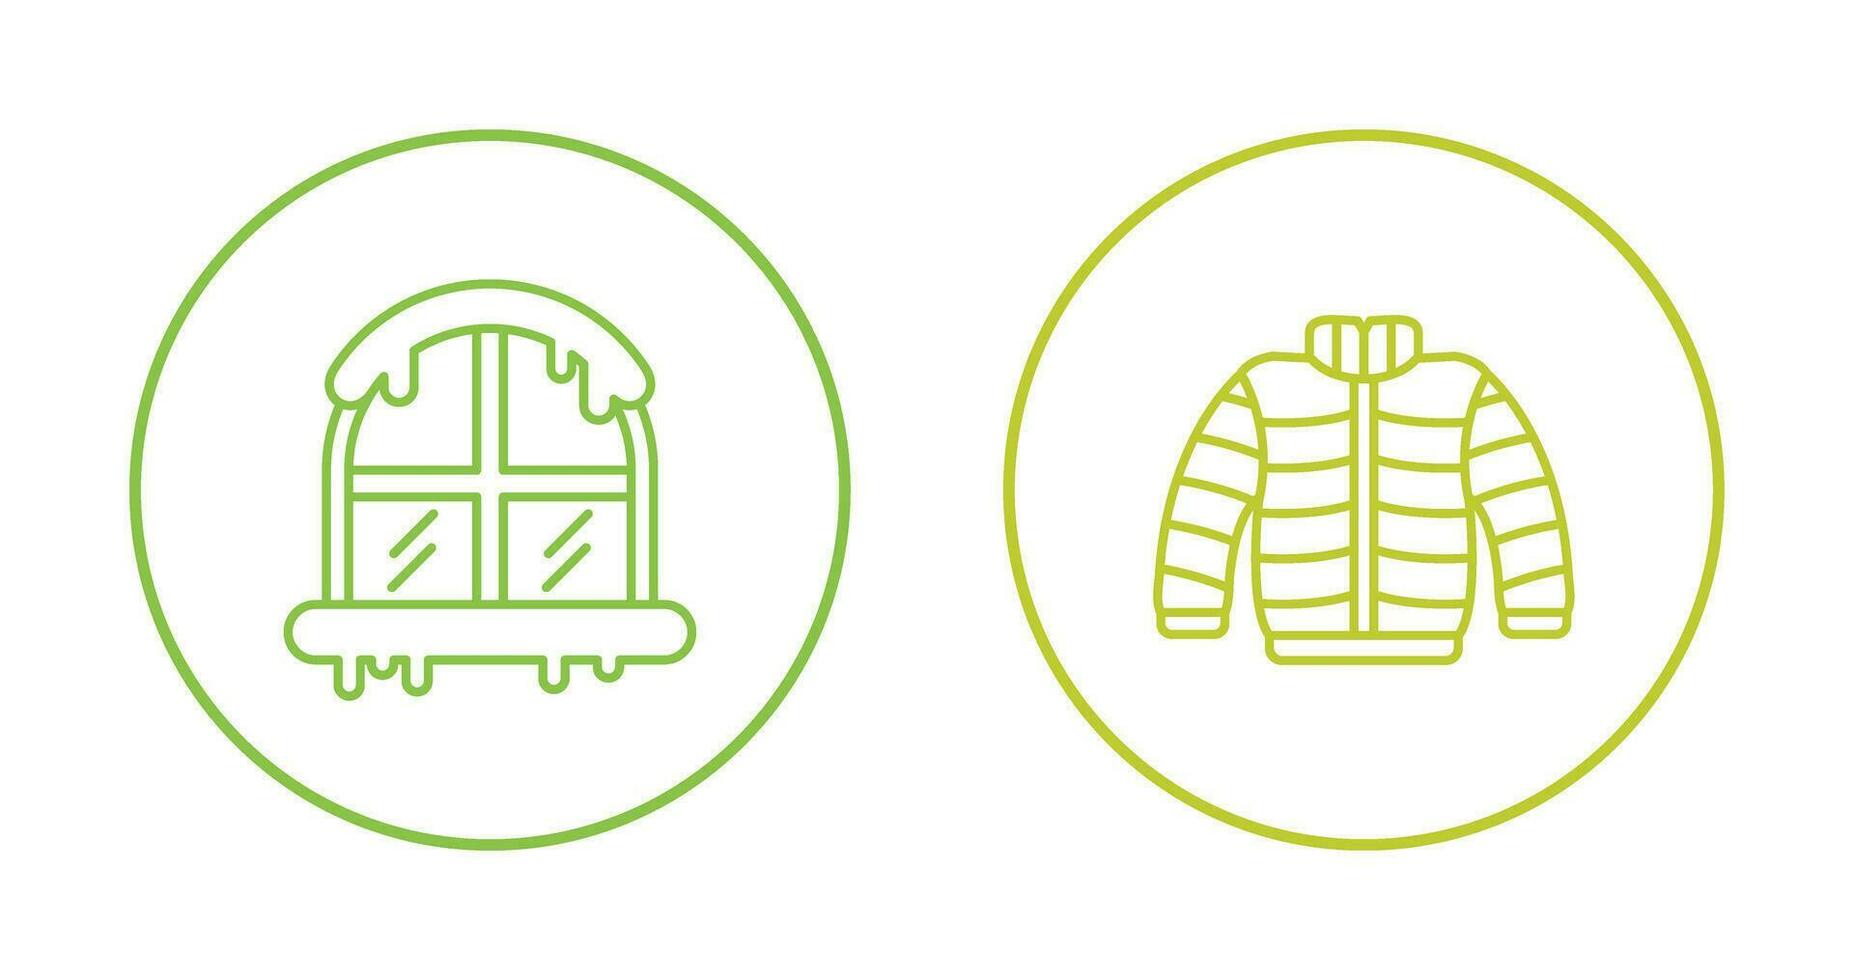 Window and Winter Clothes Icon vector